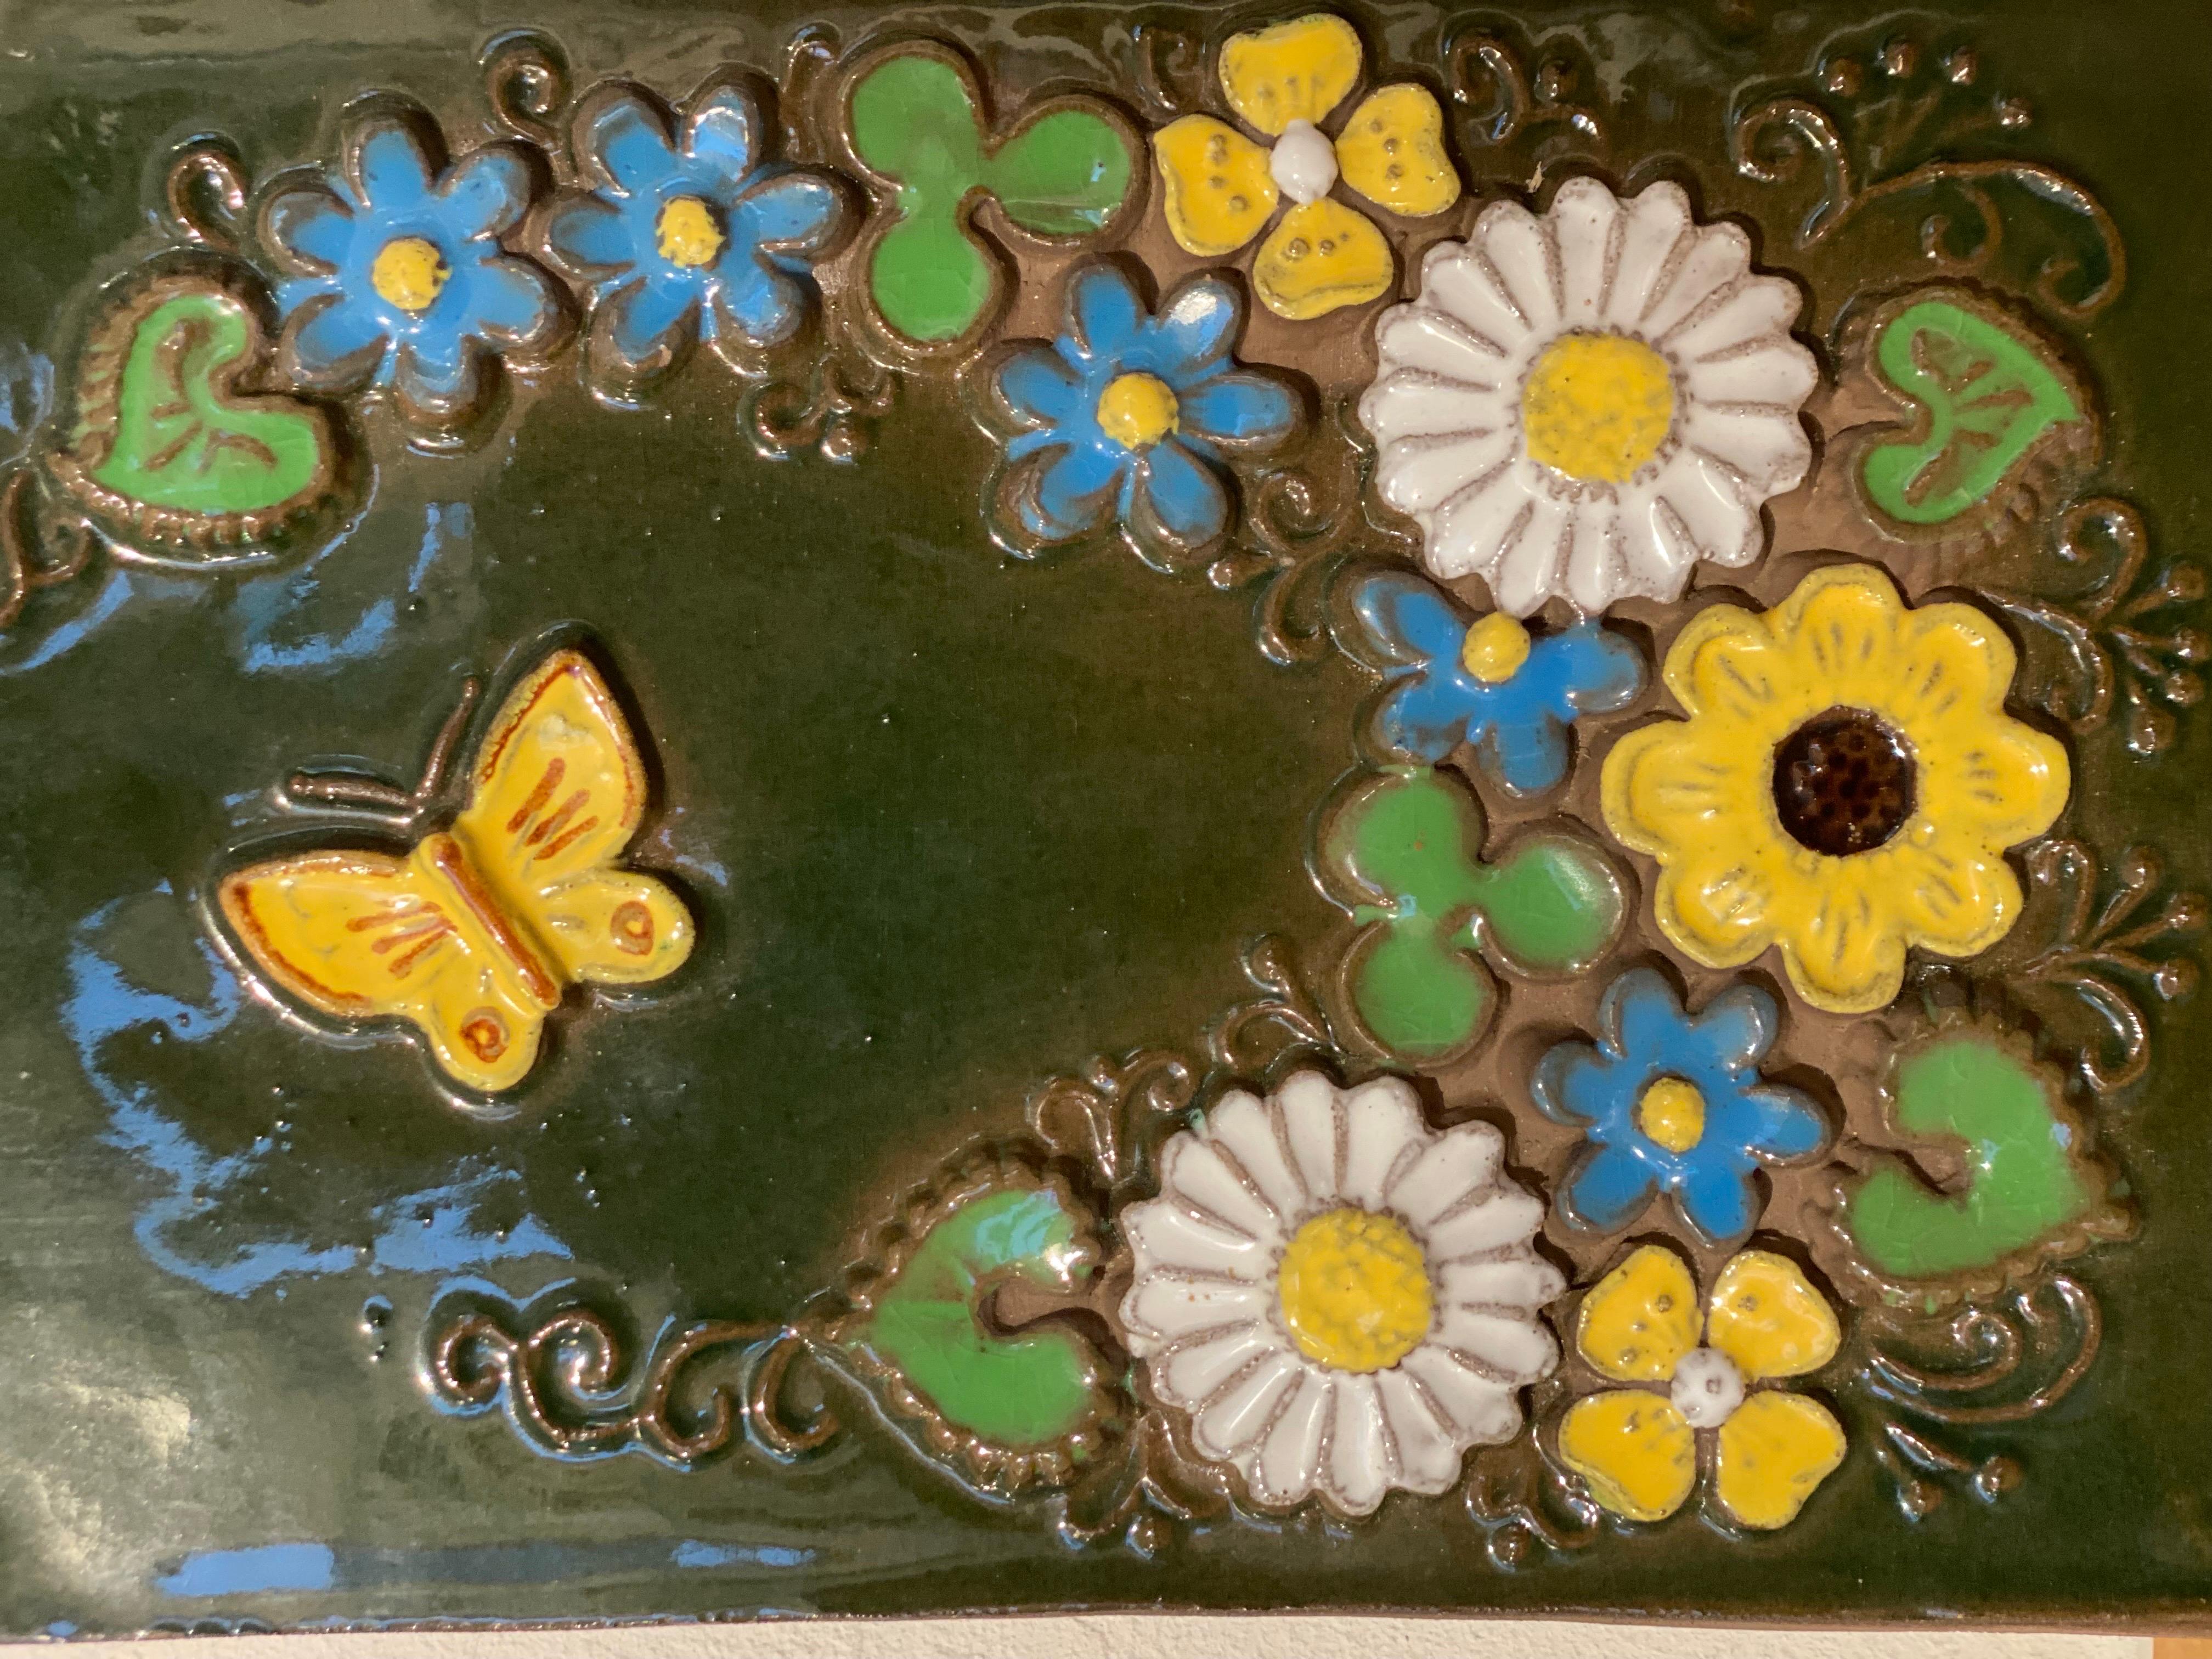 Mid-Century Swedish ceramic floral wall plaque by Jie Gantofta Sweden. Created by designer Aimo Nietosvuori.
This ceramic tile with natural flowers and butterfly is hand-painted in vibrant mauve, canary yellow, navy blue, green and white tones.